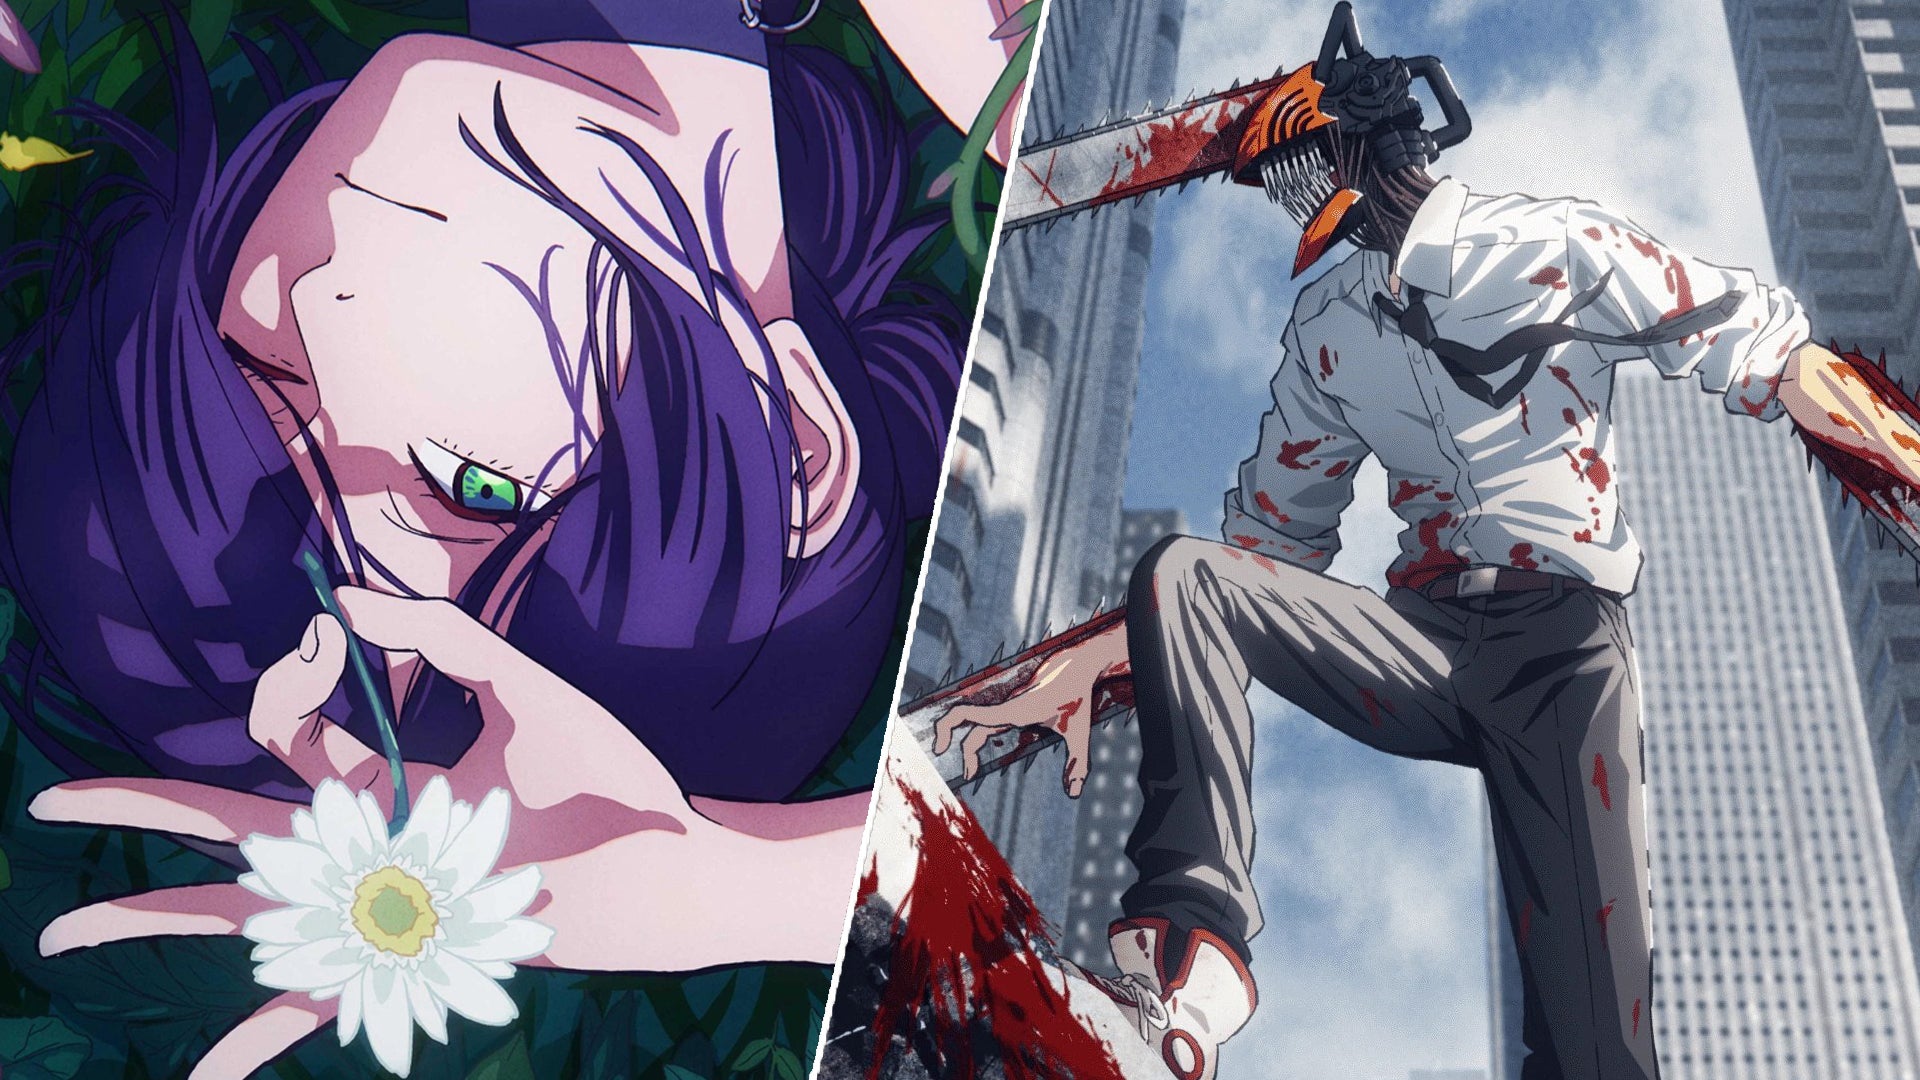 Chainsaw Man, My Hero Academia, Spy x Family: Your 2022 Fall Anime schedule